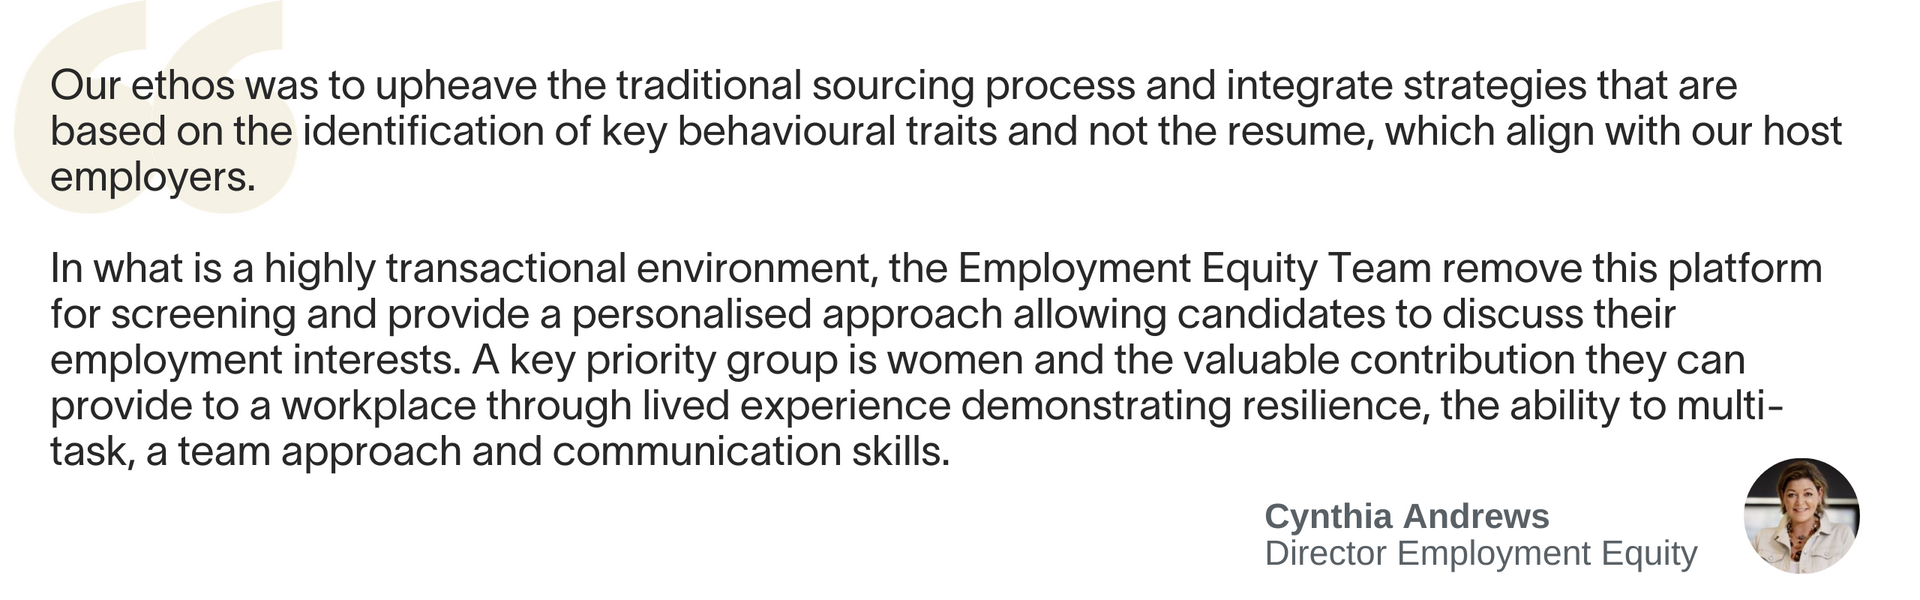 Cynthia Andrews Director Employment Equity Chandler Macleod